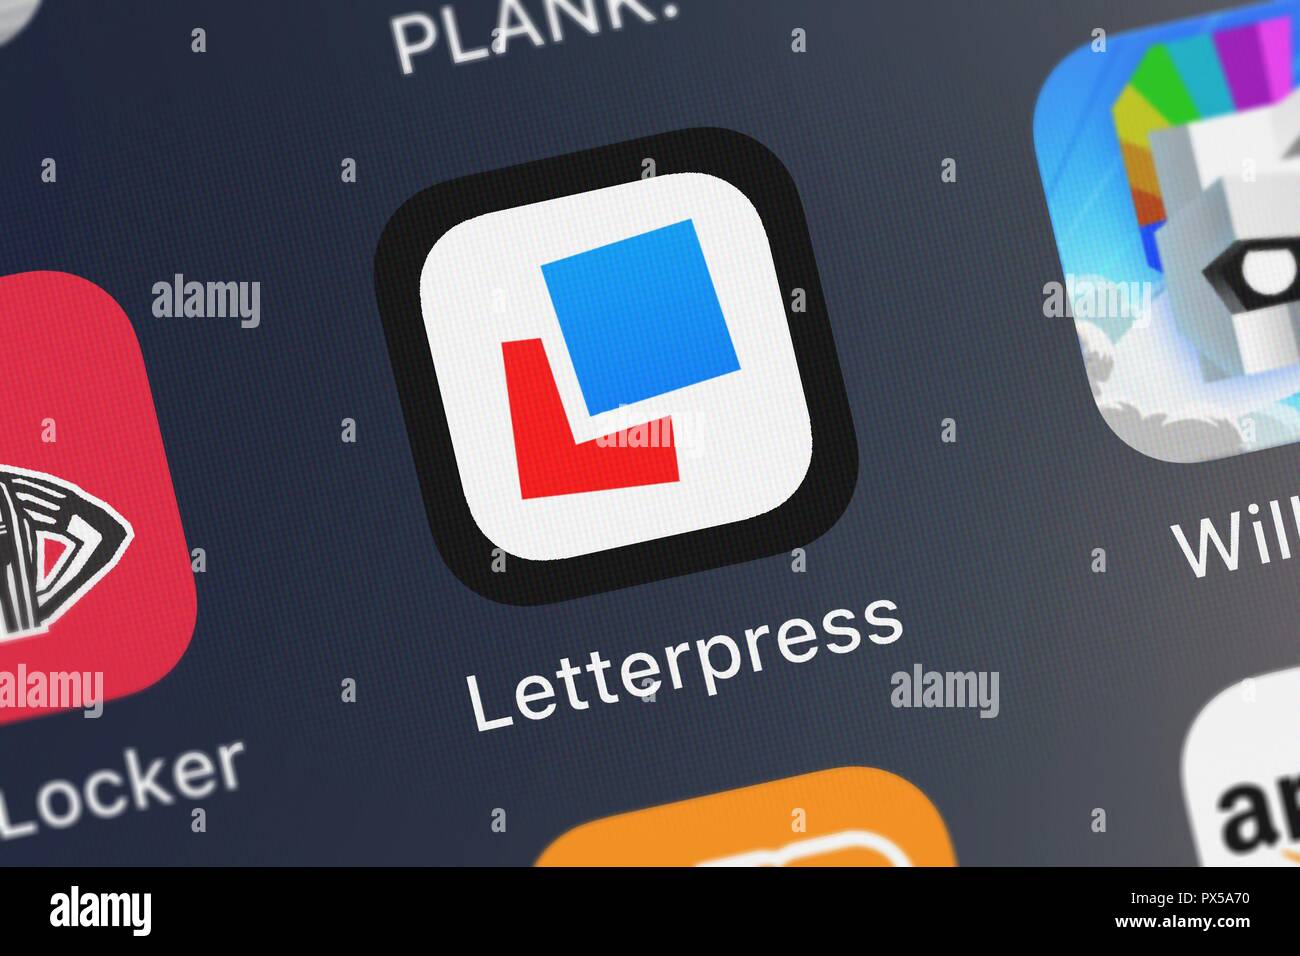 London, United Kingdom - October 19, 2018: The Letterpress - Word Game mobile app from Solebon LLC on an iPhone screen. Stock Photo